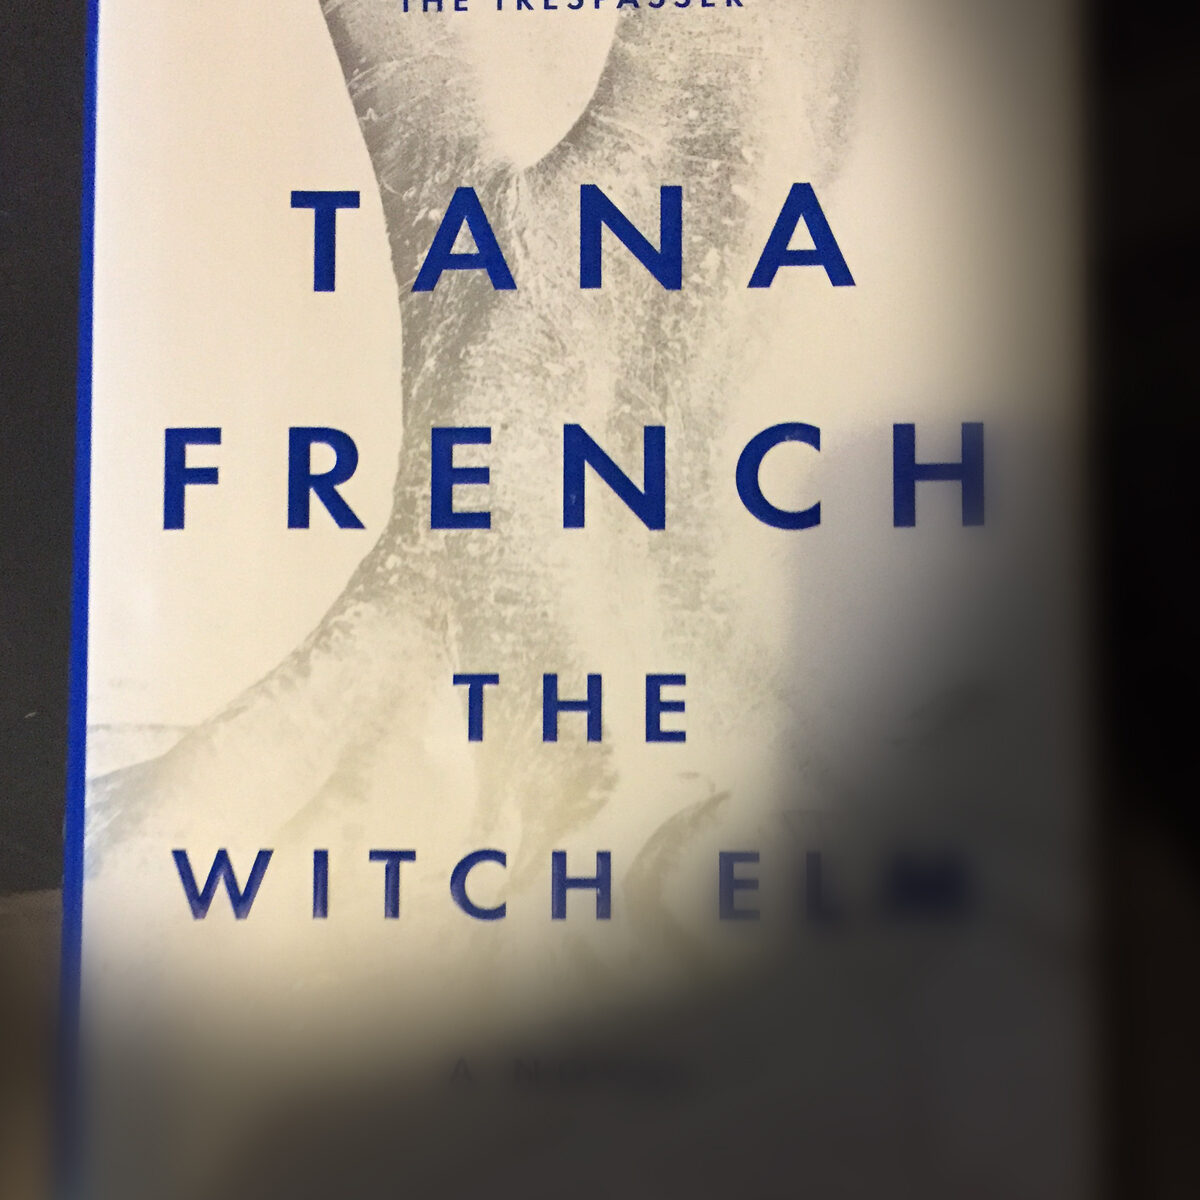 The Witch Elm by Tana French